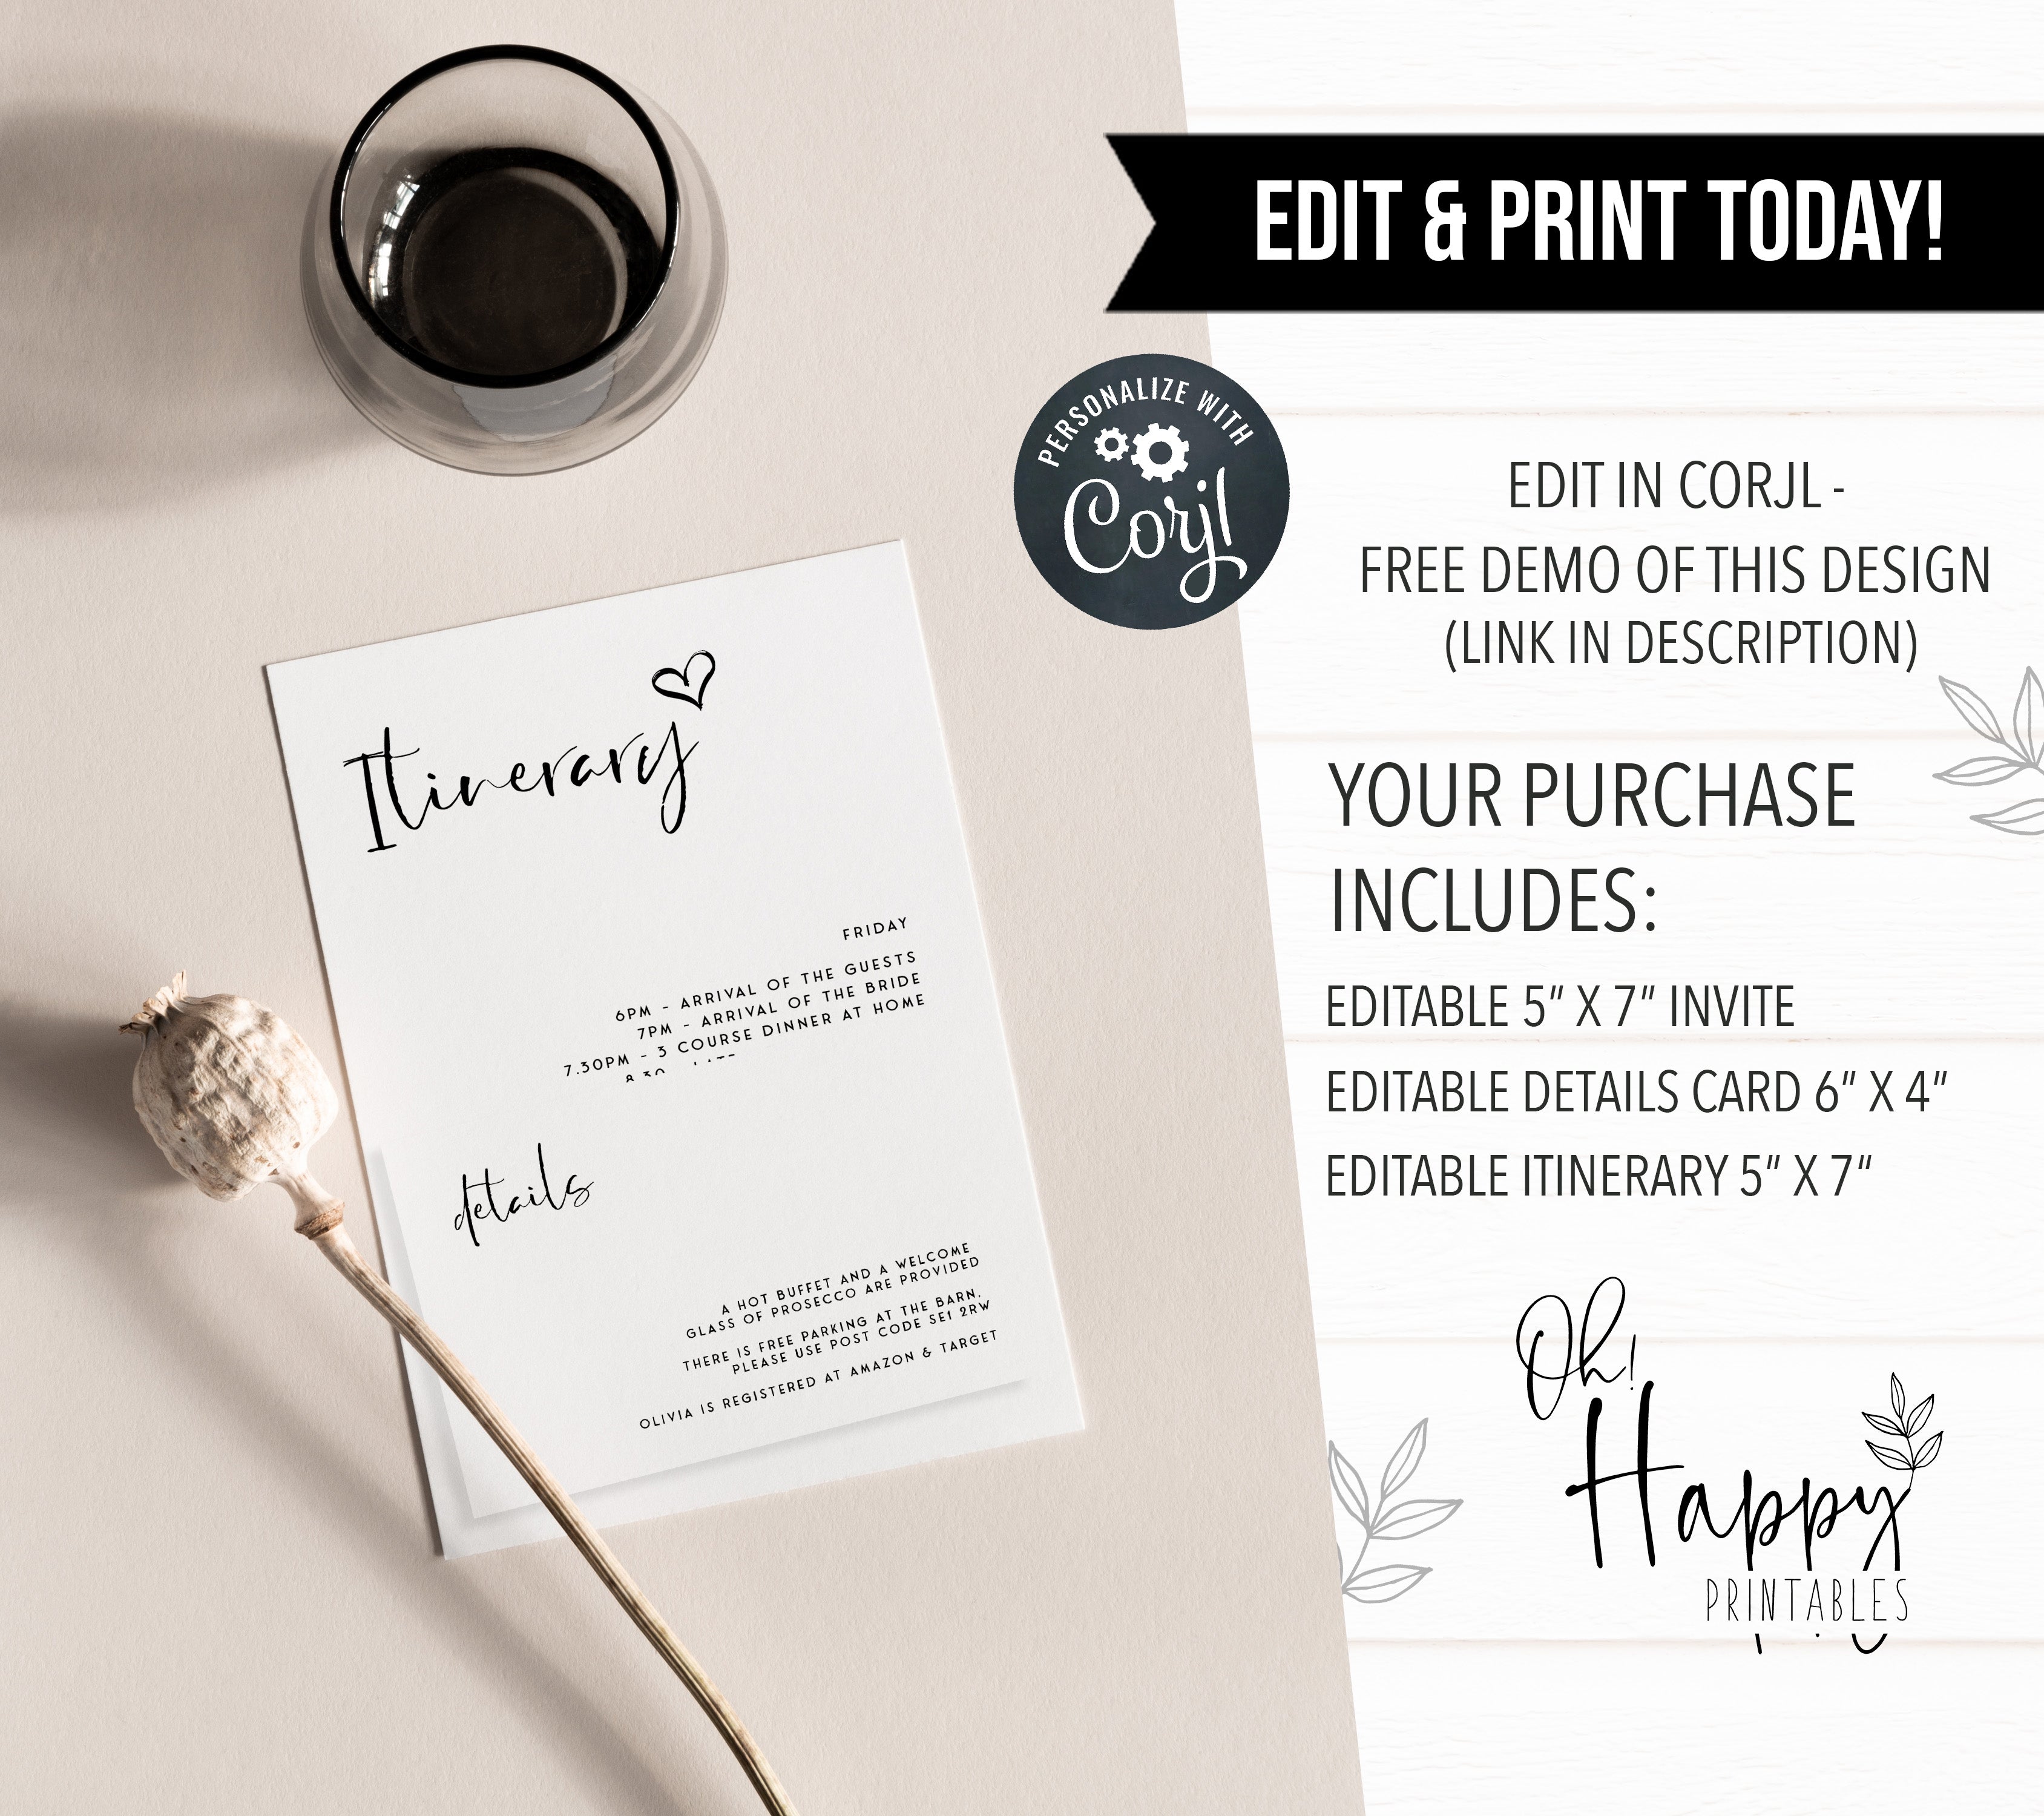 Fully editable and printable bridal shower invitations with a modern minimalist design. Perfect for a modern simple bridal shower themed party